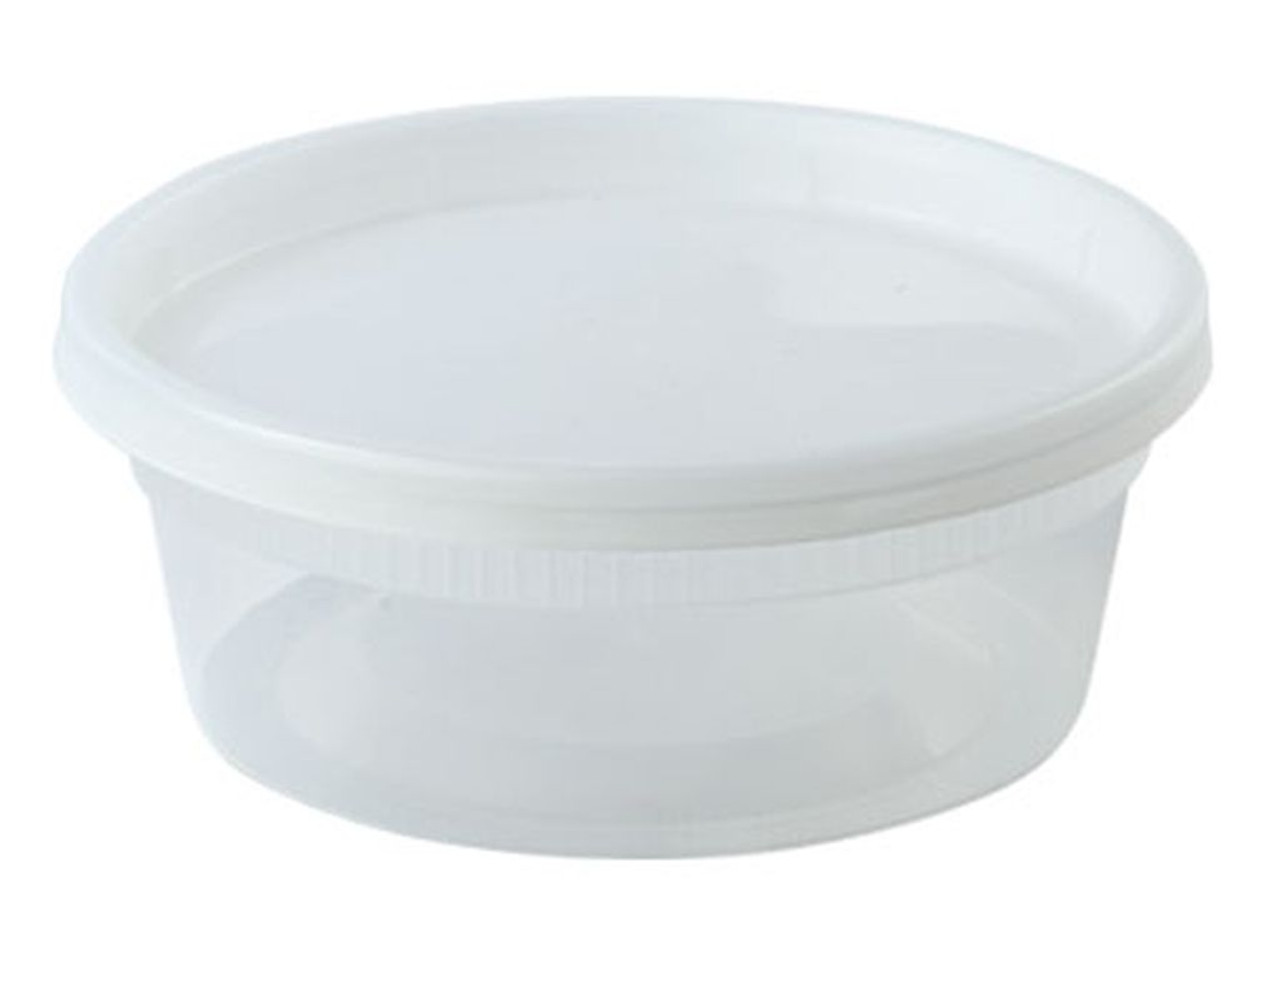 https://cdn11.bigcommerce.com/s-hgqmwywp99/images/stencil/1280x1280/products/49219/44010/8oz-clear-plastic-disposable-containers-w-lids-50ct-13__99339.1675880310.jpg?c=1?imbypass=on